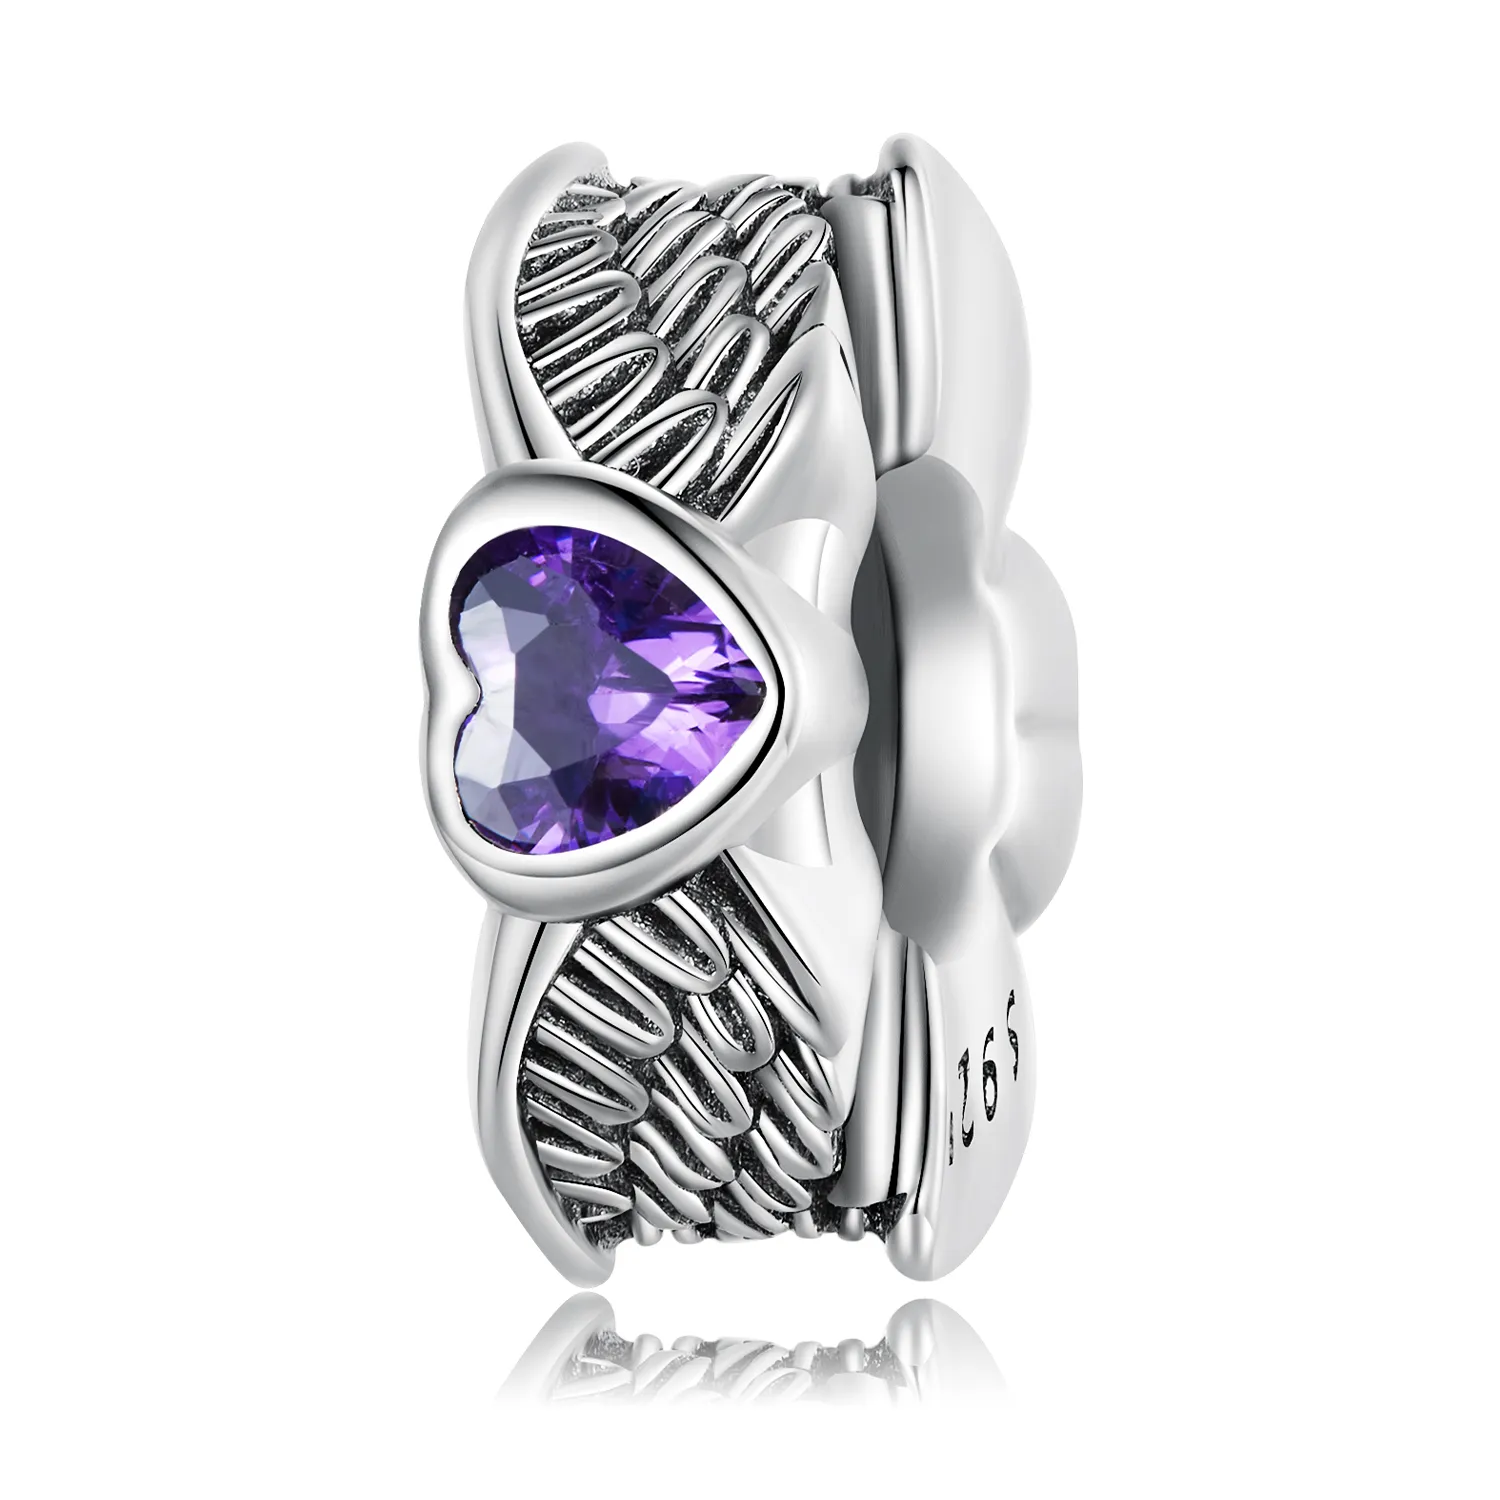 Pandora Style Guardian Heart Spacer Charm - BSC677